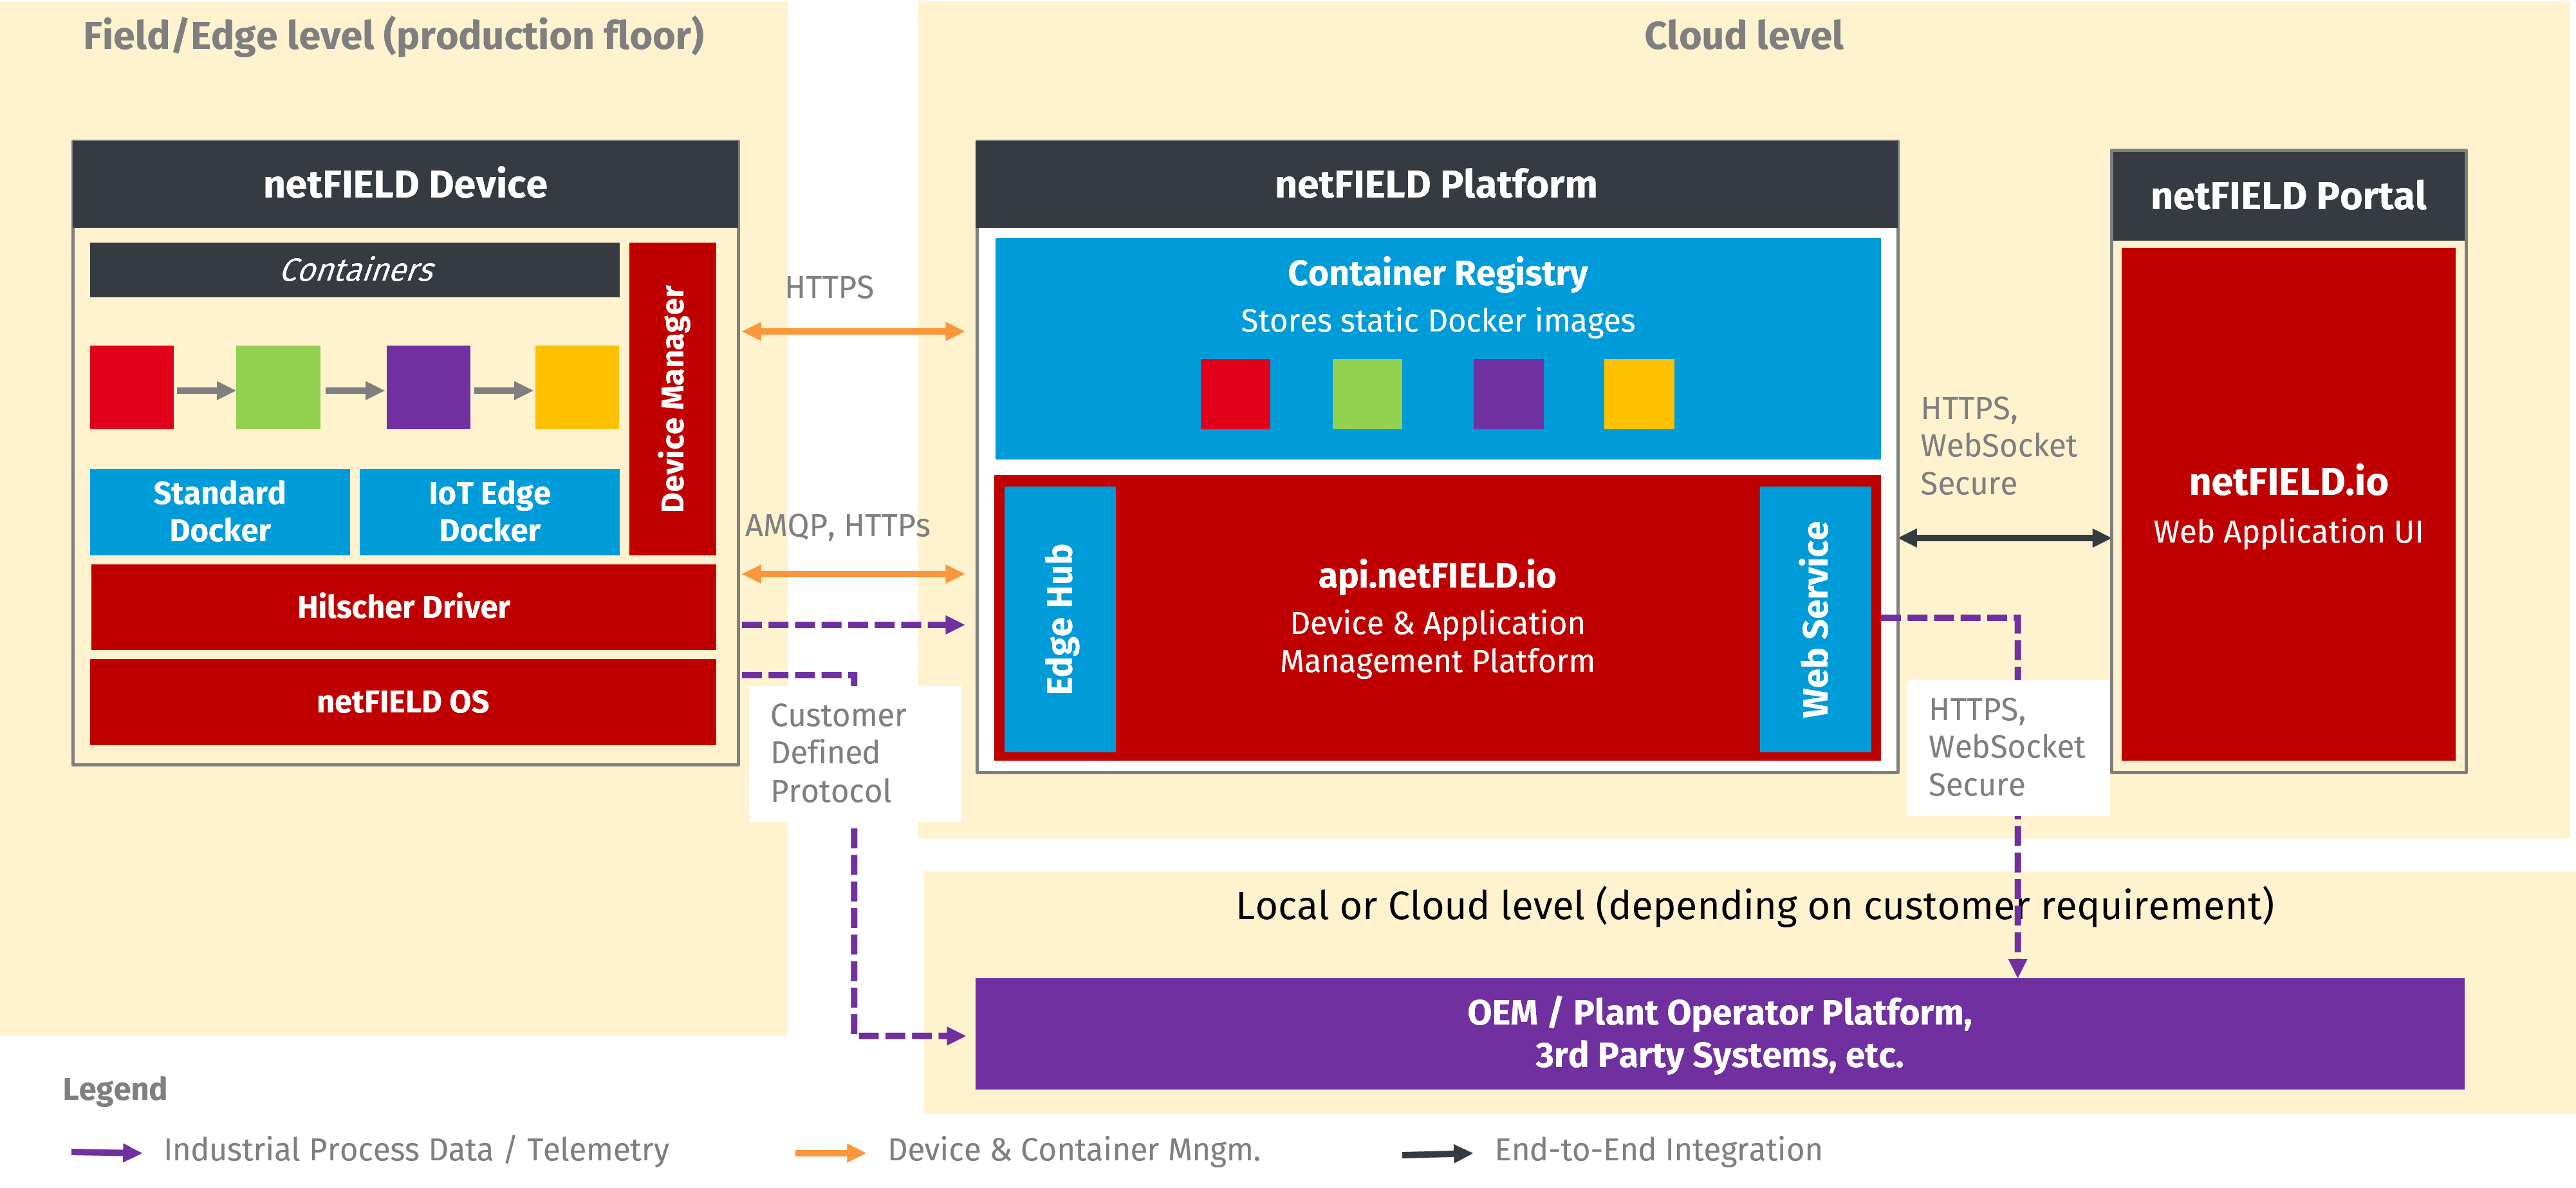 A technical graphic explaining the different levels of communication within the netFIELD platform.